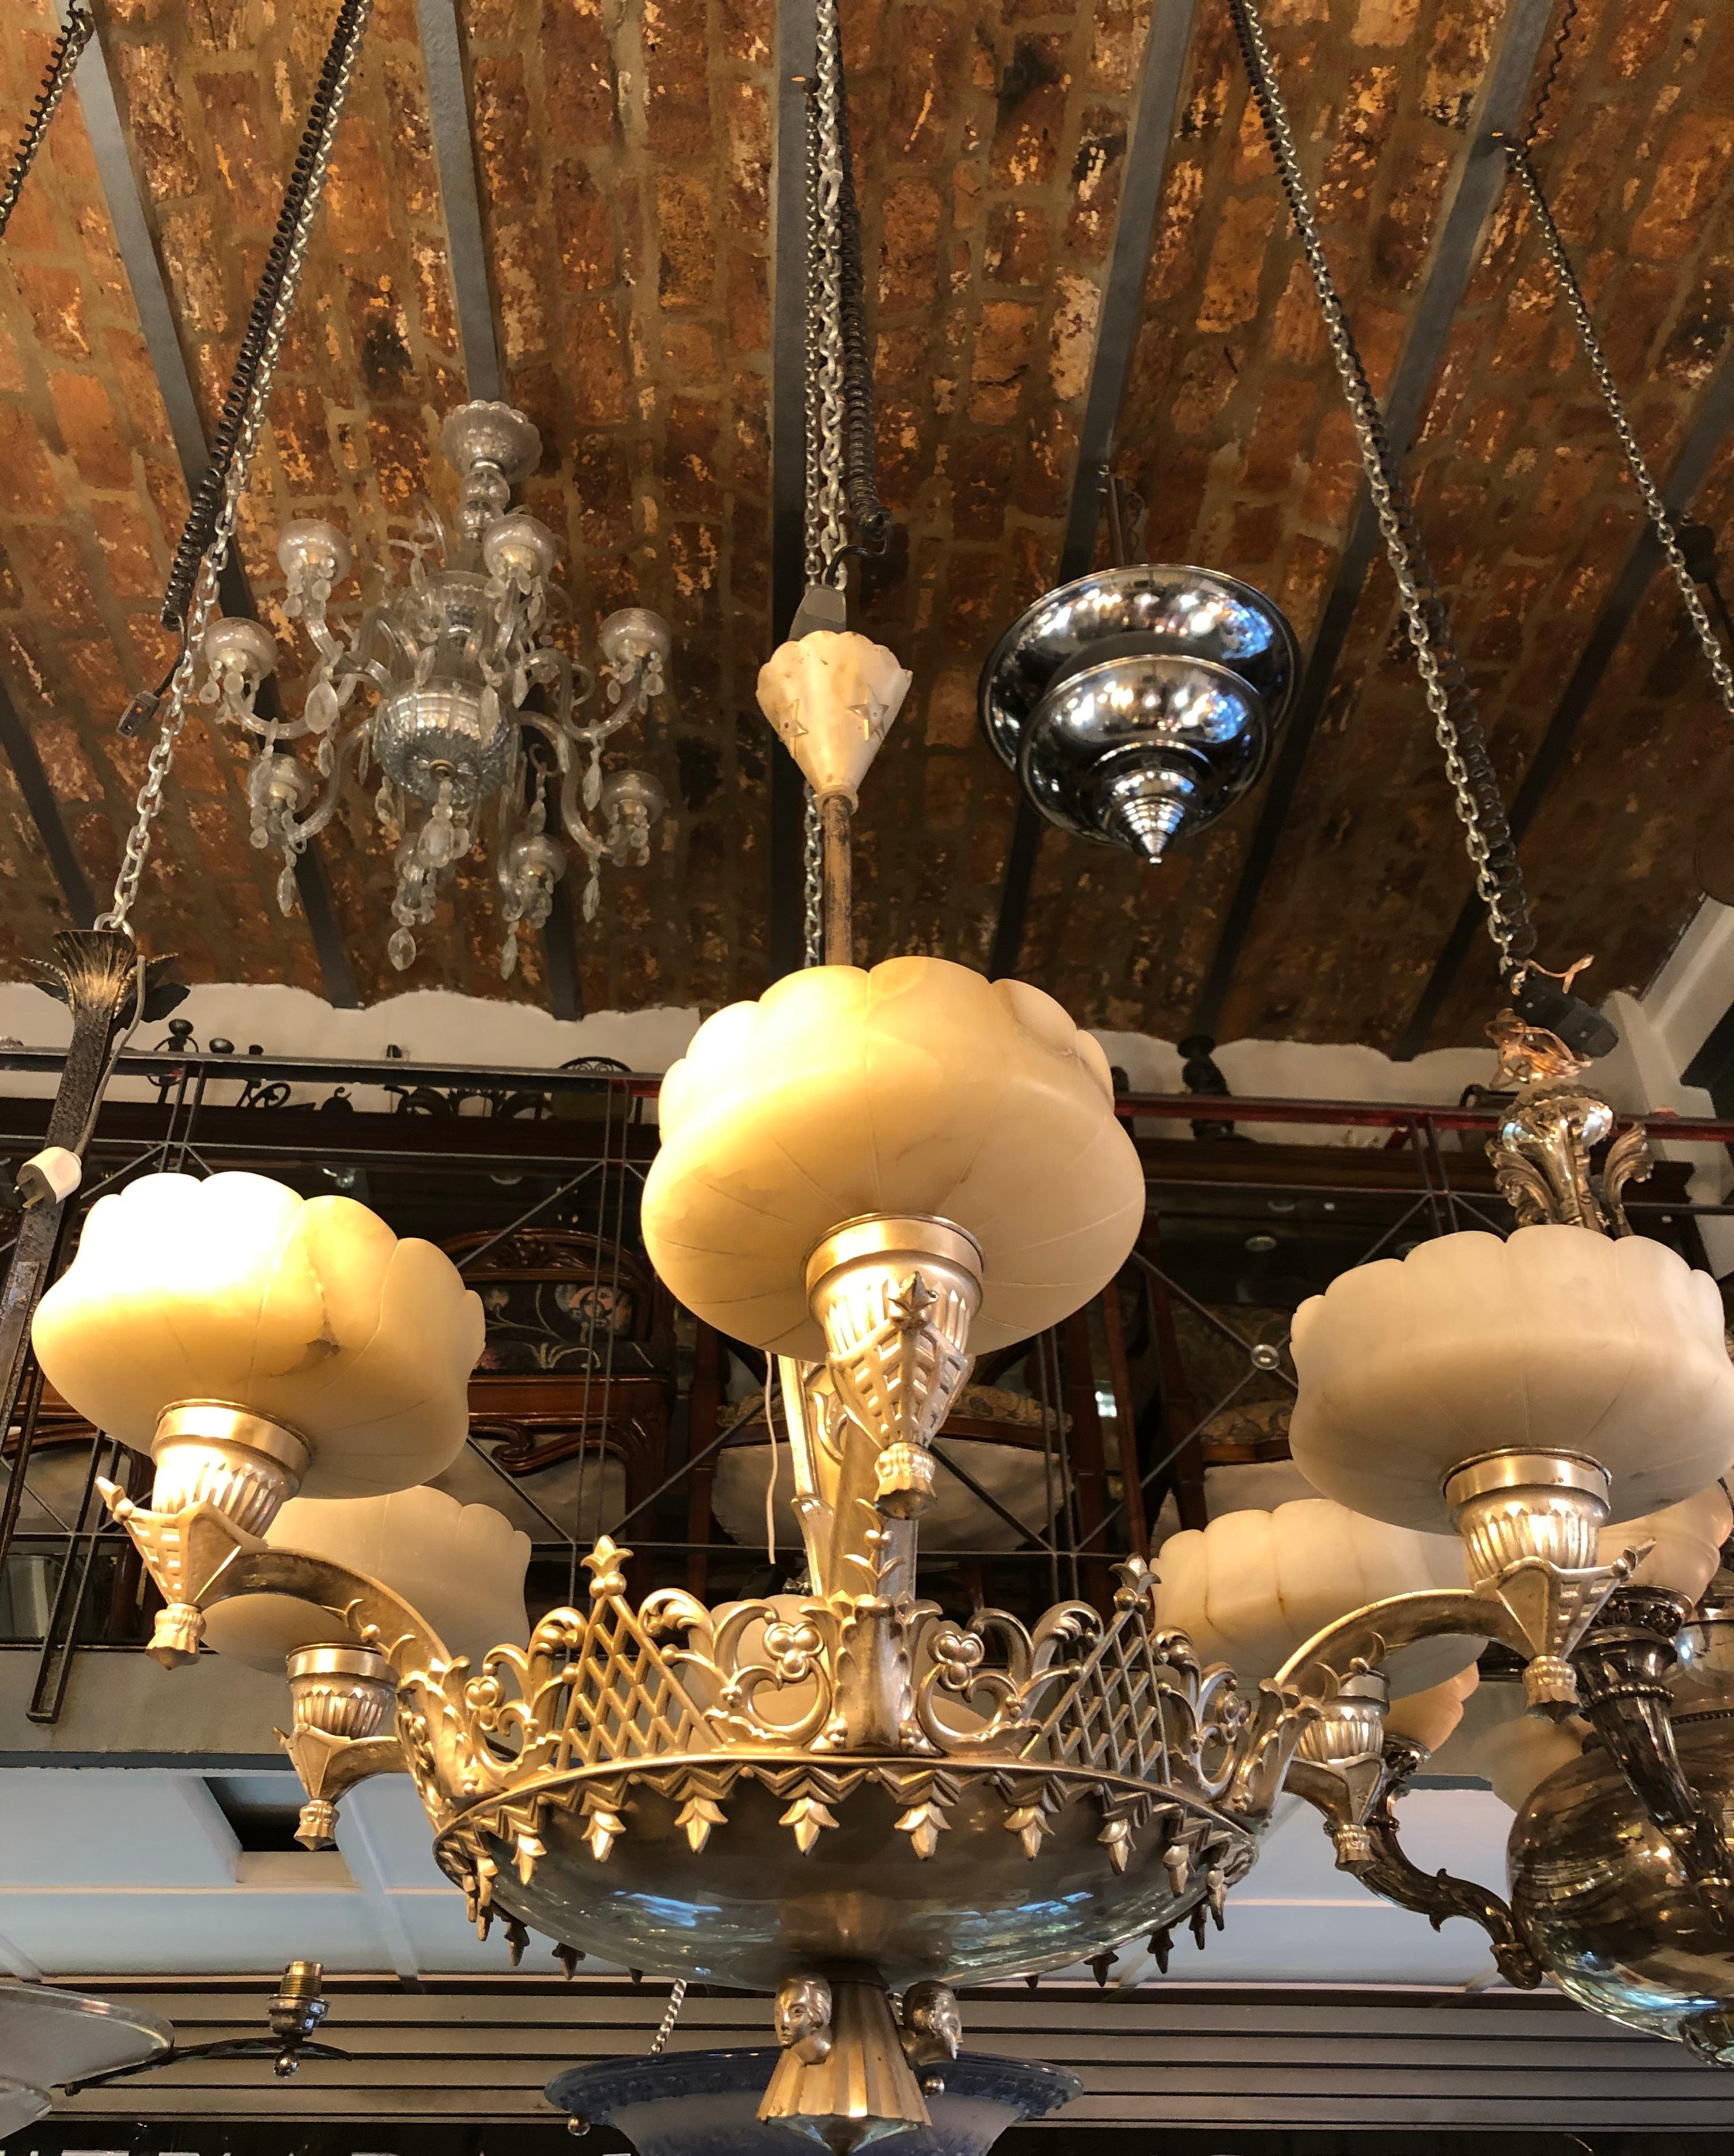 Hanging lamp Vienna Secession

Material: silver plated bronze and alabaster
Style: Vienna Secession
Country: Vienna
If you are looking for sconces to match your ceiling lighting, we have what you need.
To take care of your property and the lives of